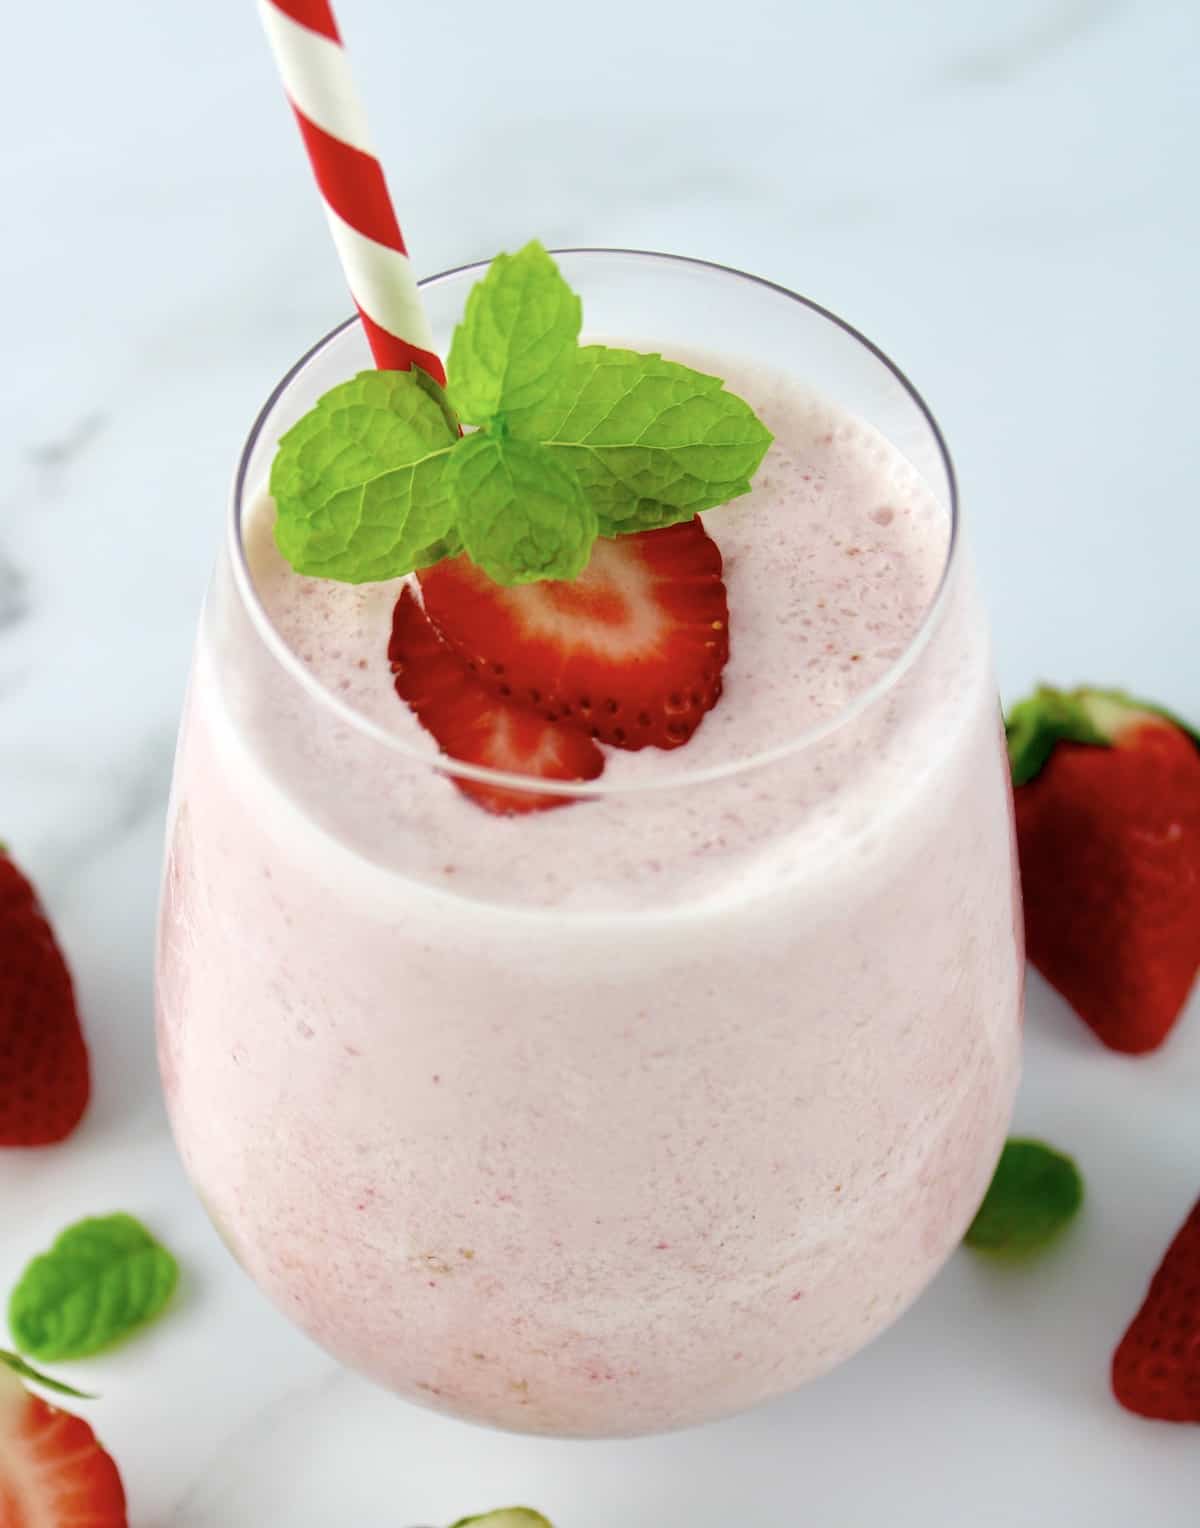 Keto Strawberry Cheesecake Smoothie with strawberry slices and mint garnish